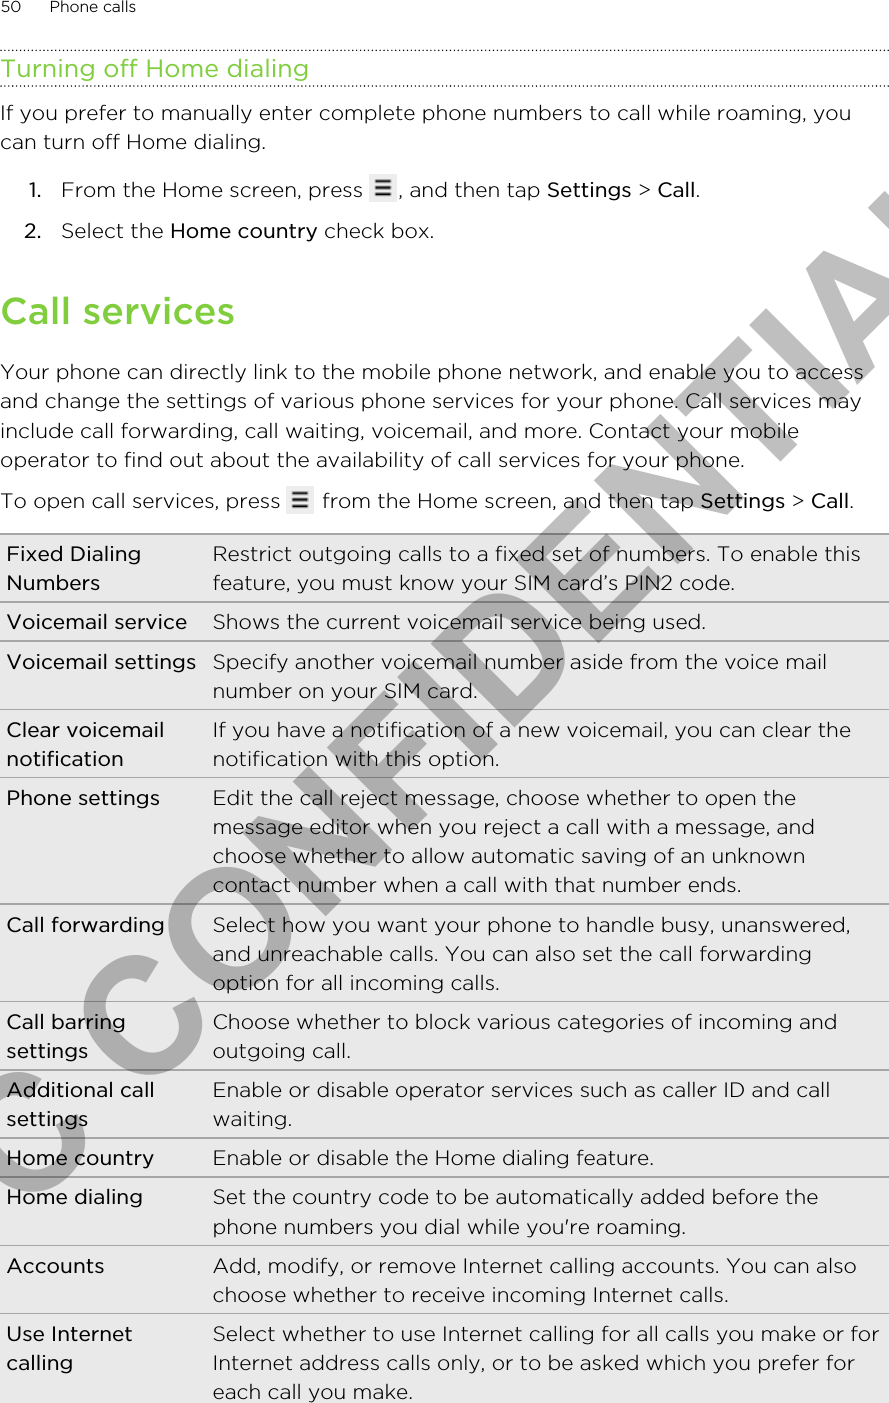 Turning off Home dialingIf you prefer to manually enter complete phone numbers to call while roaming, youcan turn off Home dialing.1. From the Home screen, press  , and then tap Settings &gt; Call.2. Select the Home country check box.Call servicesYour phone can directly link to the mobile phone network, and enable you to accessand change the settings of various phone services for your phone. Call services mayinclude call forwarding, call waiting, voicemail, and more. Contact your mobileoperator to find out about the availability of call services for your phone.To open call services, press   from the Home screen, and then tap Settings &gt; Call.Fixed DialingNumbersRestrict outgoing calls to a fixed set of numbers. To enable thisfeature, you must know your SIM card’s PIN2 code.Voicemail service Shows the current voicemail service being used.Voicemail settings Specify another voicemail number aside from the voice mailnumber on your SIM card.Clear voicemailnotificationIf you have a notification of a new voicemail, you can clear thenotification with this option.Phone settings Edit the call reject message, choose whether to open themessage editor when you reject a call with a message, andchoose whether to allow automatic saving of an unknowncontact number when a call with that number ends.Call forwarding Select how you want your phone to handle busy, unanswered,and unreachable calls. You can also set the call forwardingoption for all incoming calls.Call barringsettingsChoose whether to block various categories of incoming andoutgoing call.Additional callsettingsEnable or disable operator services such as caller ID and callwaiting.Home country Enable or disable the Home dialing feature.Home dialing Set the country code to be automatically added before thephone numbers you dial while you&apos;re roaming.Accounts Add, modify, or remove Internet calling accounts. You can alsochoose whether to receive incoming Internet calls.Use InternetcallingSelect whether to use Internet calling for all calls you make or forInternet address calls only, or to be asked which you prefer foreach call you make.50 Phone callsHTC CONFIDENTIAL